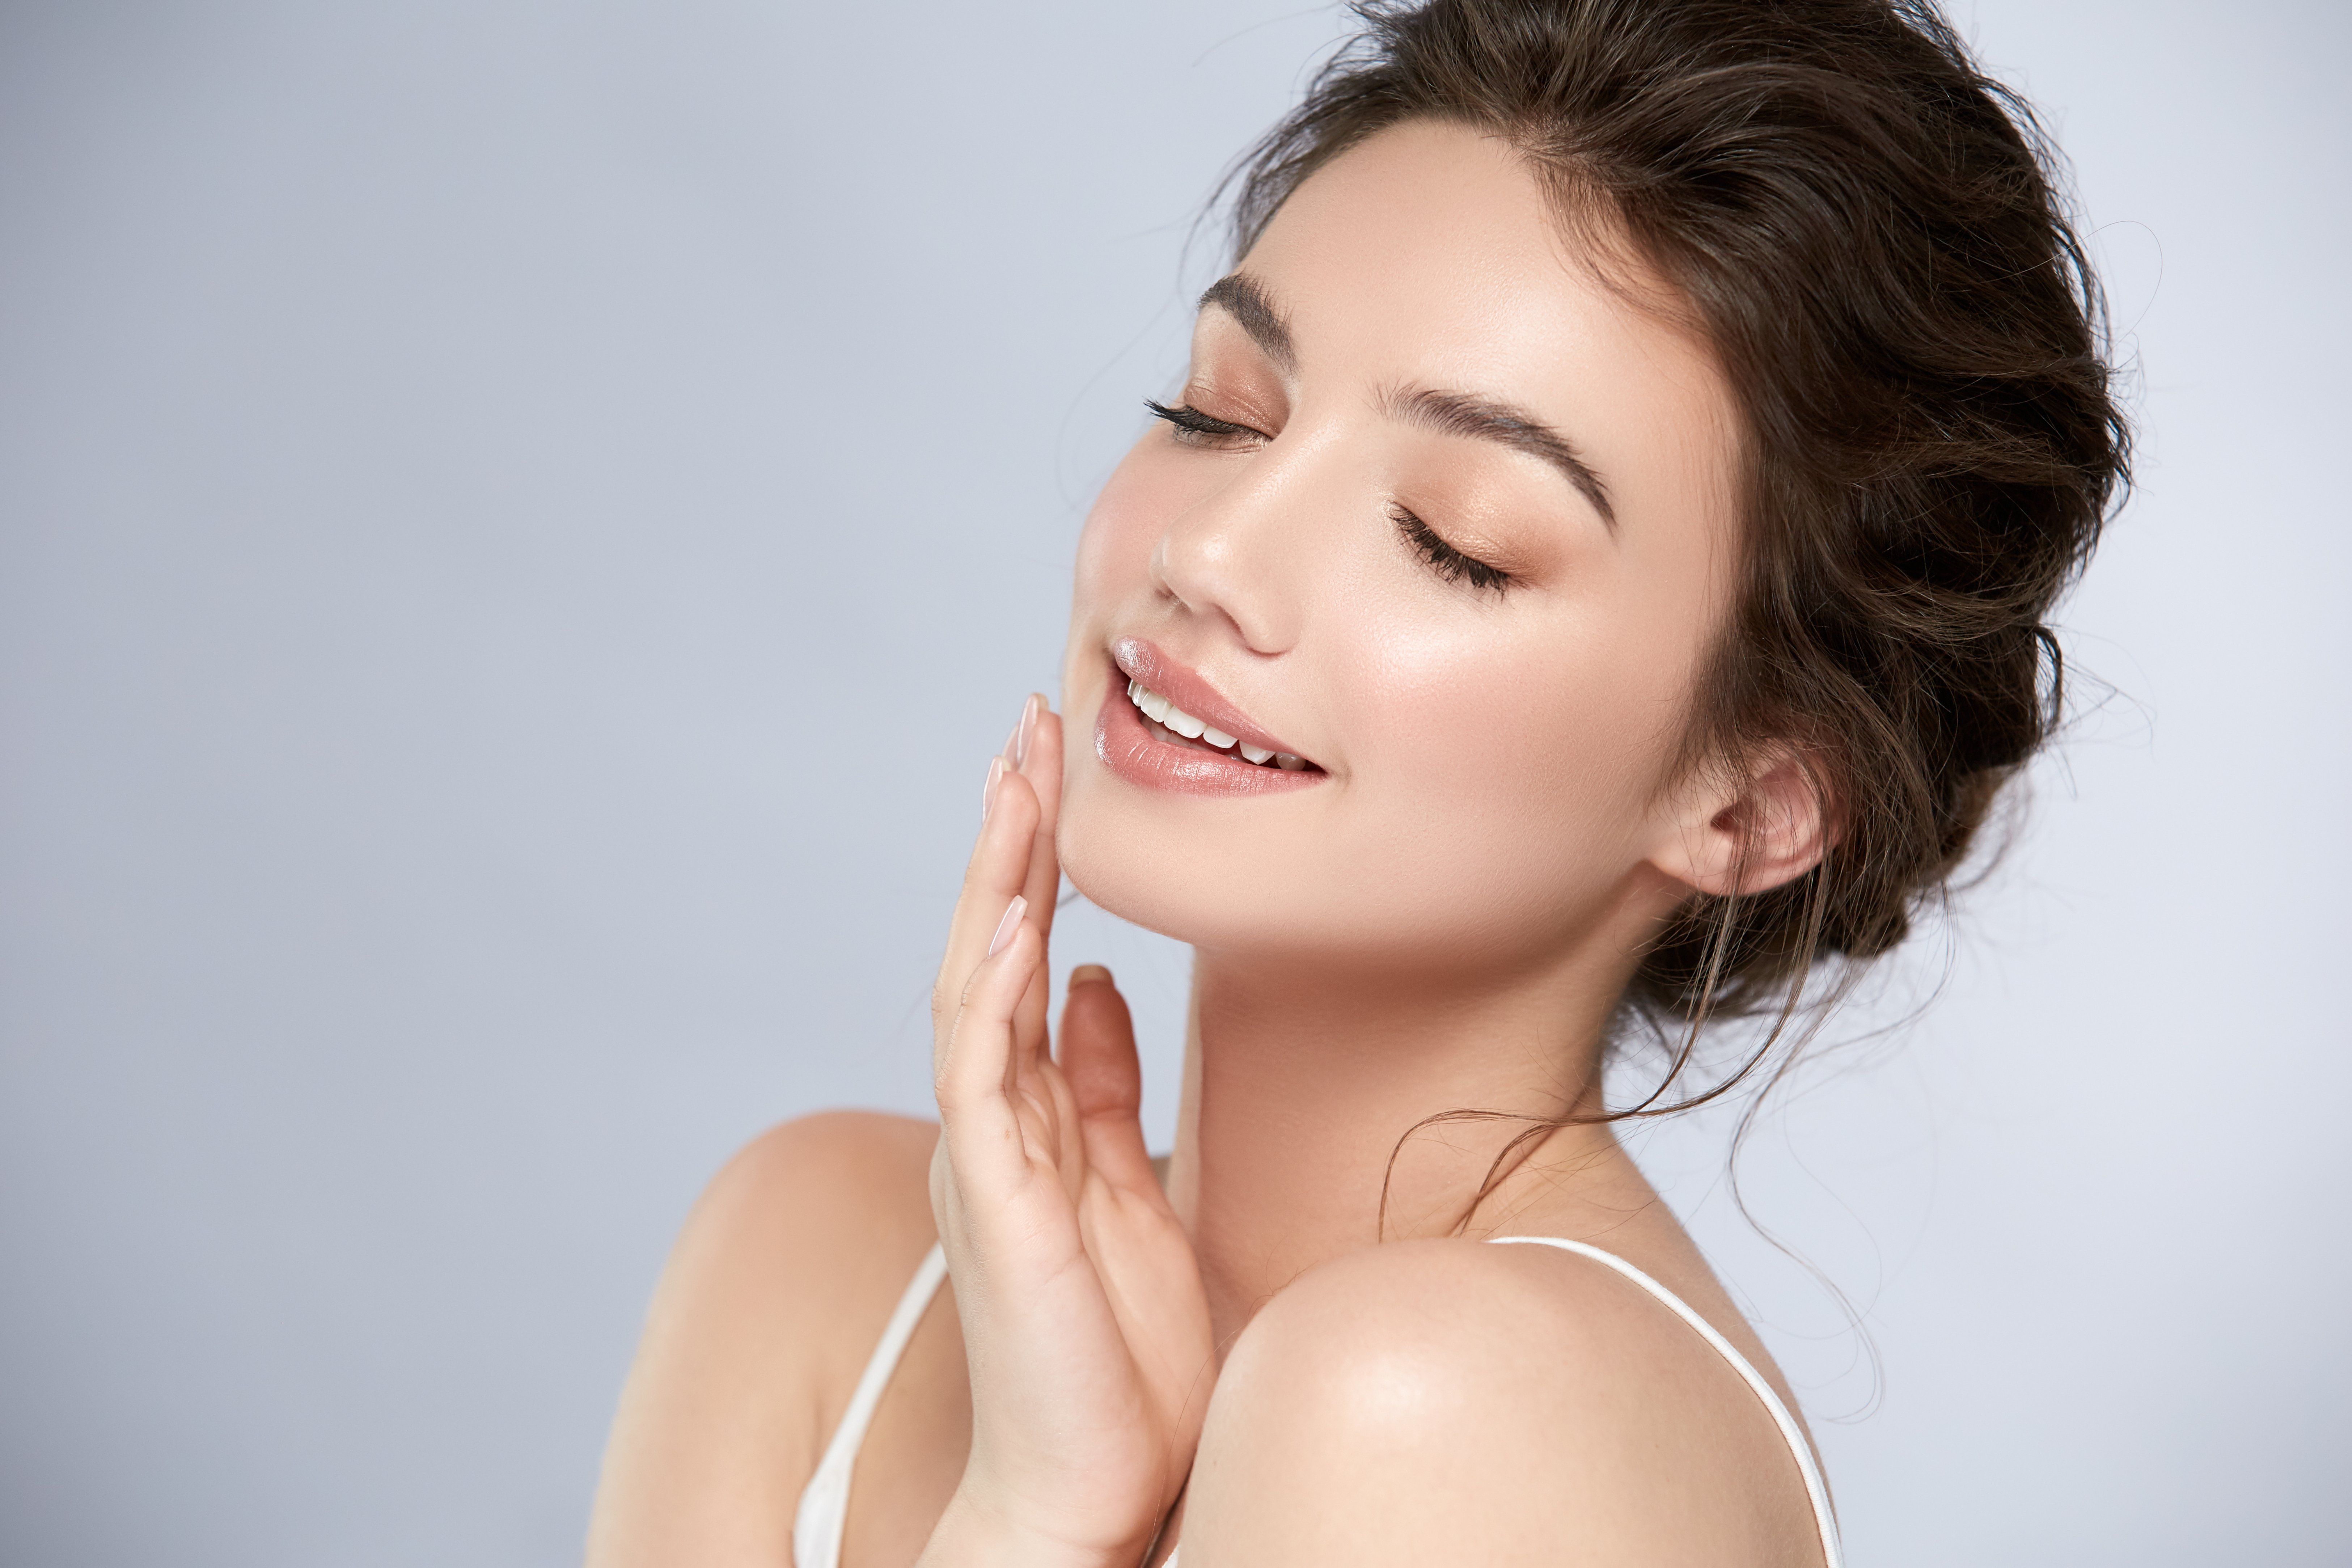 How Do You Get the Best Results From Cryoskin?